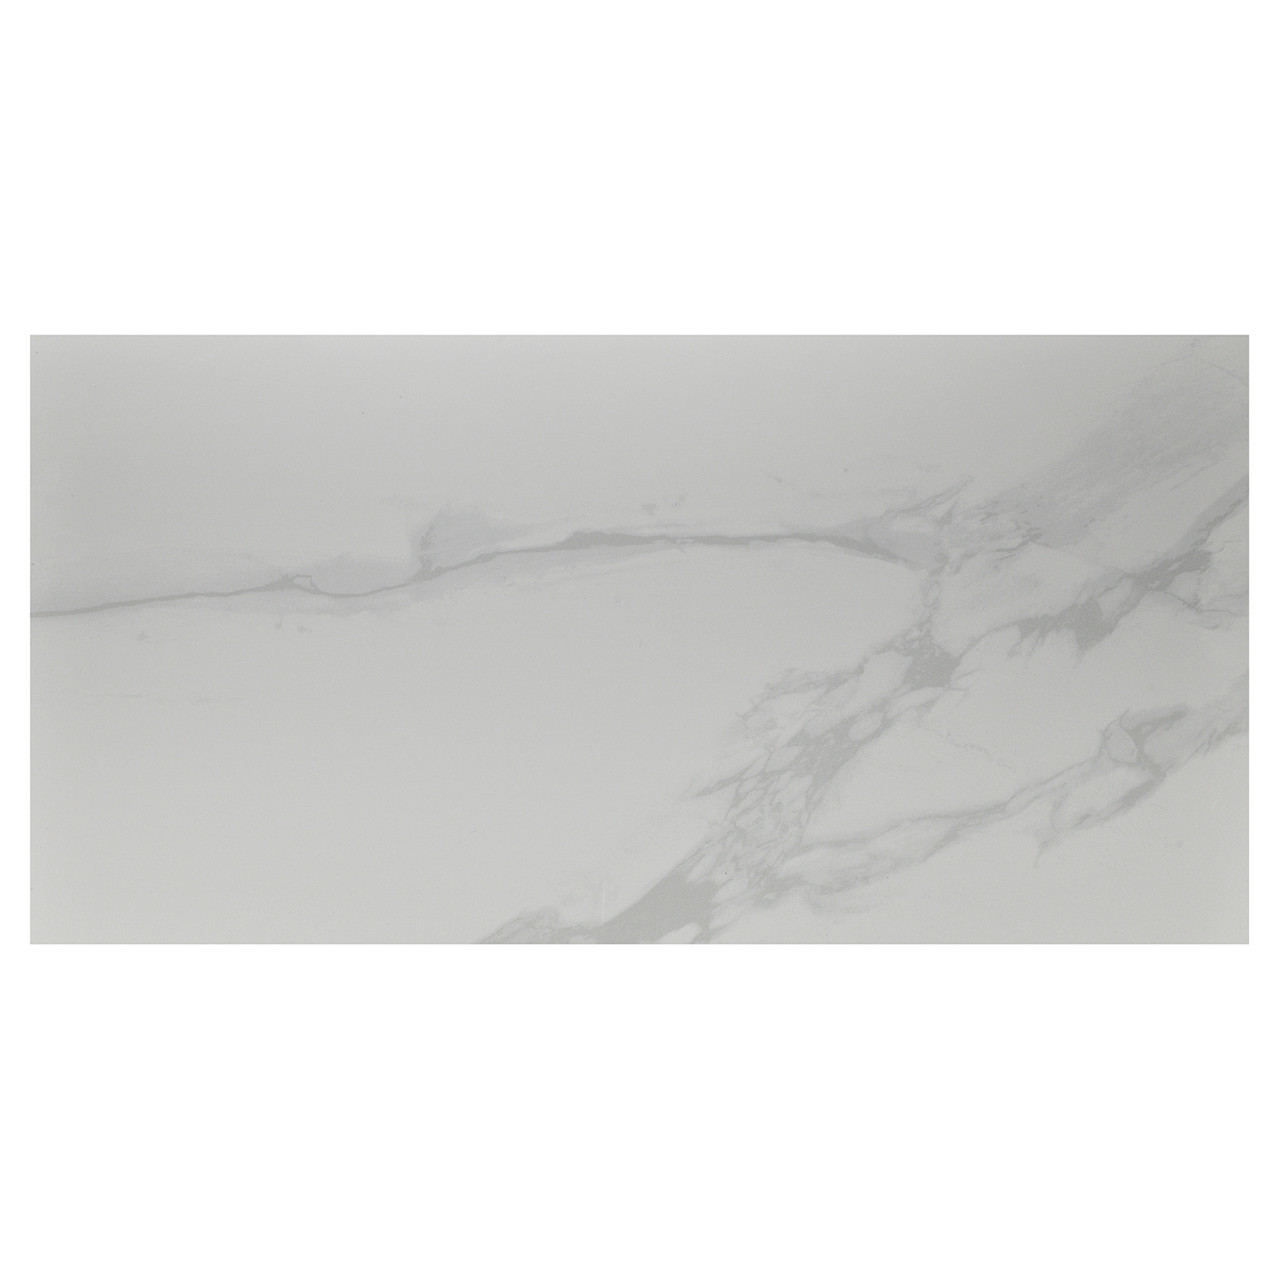 Classic Carrera Full Lapatto Grey 60cm x 120cm Porcelain Wall and Floor Tile  - Wholesale Domestic